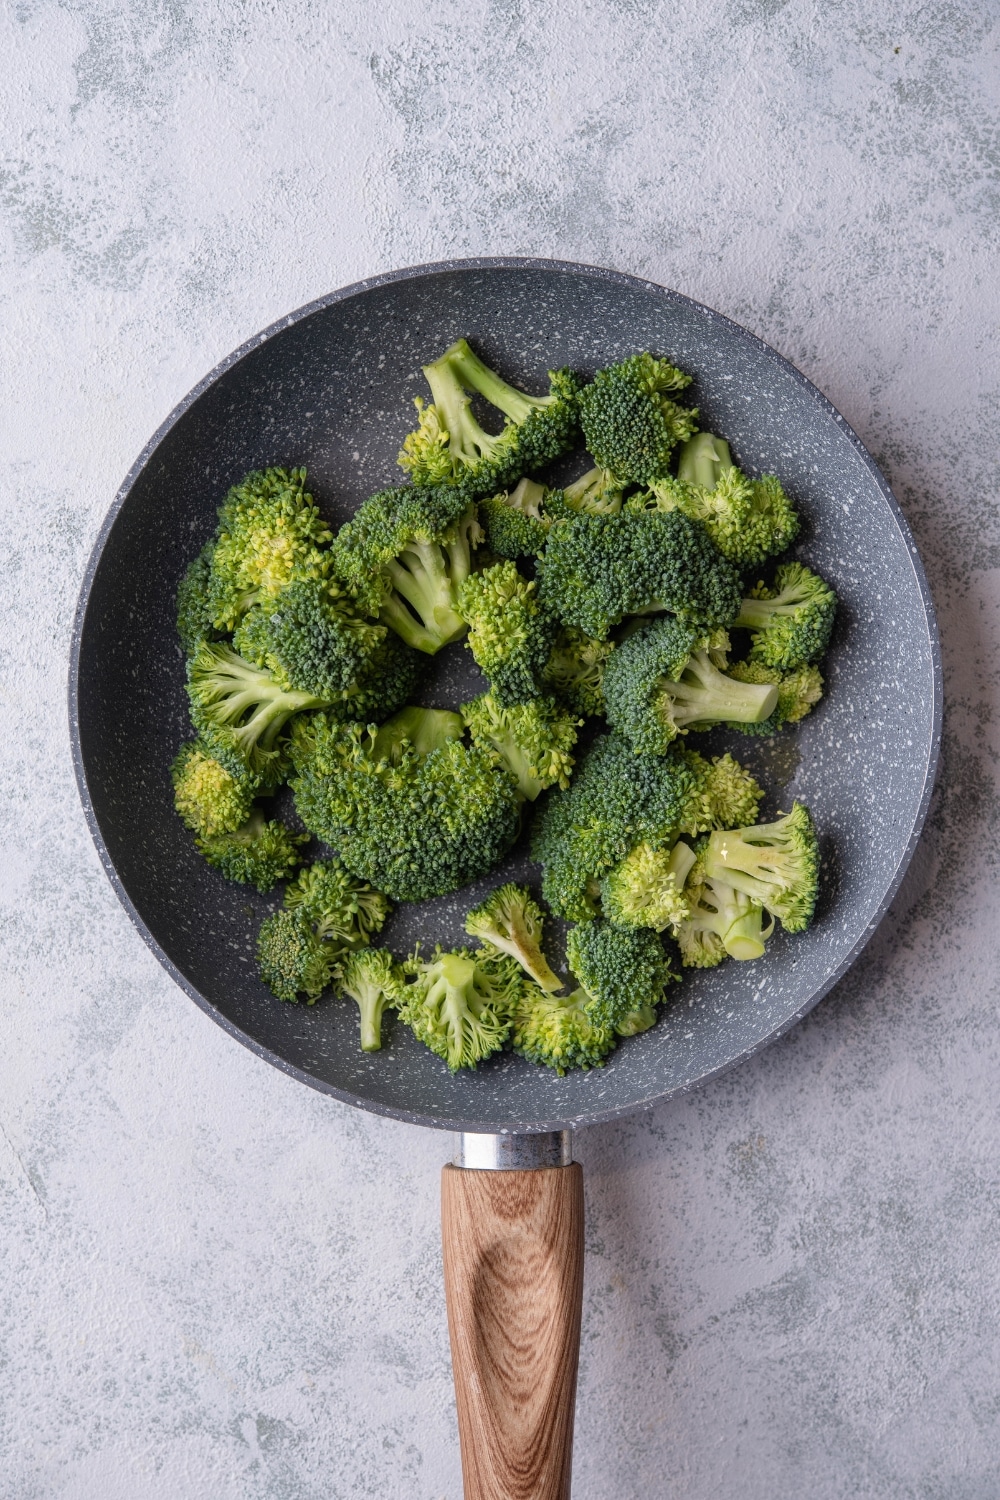 Uncooked broccoli florets on a grey speckled skillet with a wooden handle.